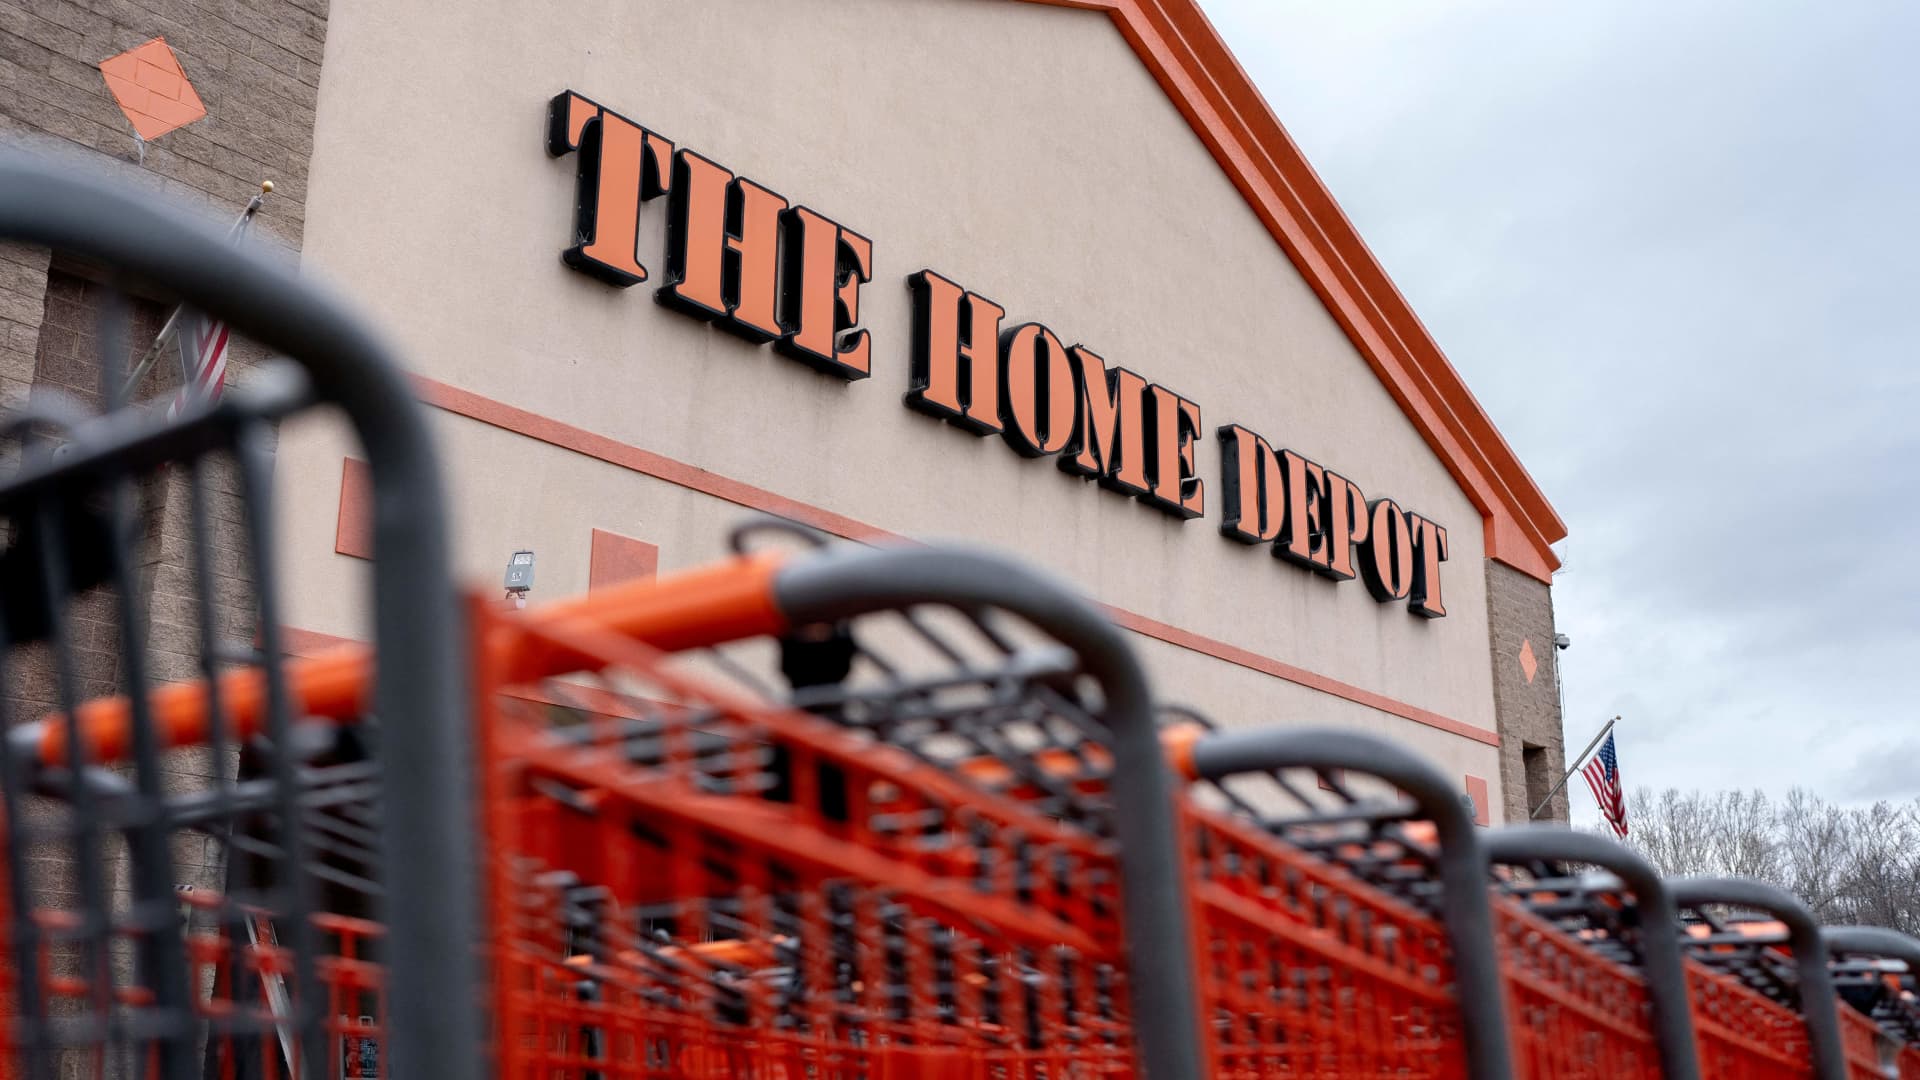 Home Depot’s customers have been resilient despite economic headwinds, CEO says